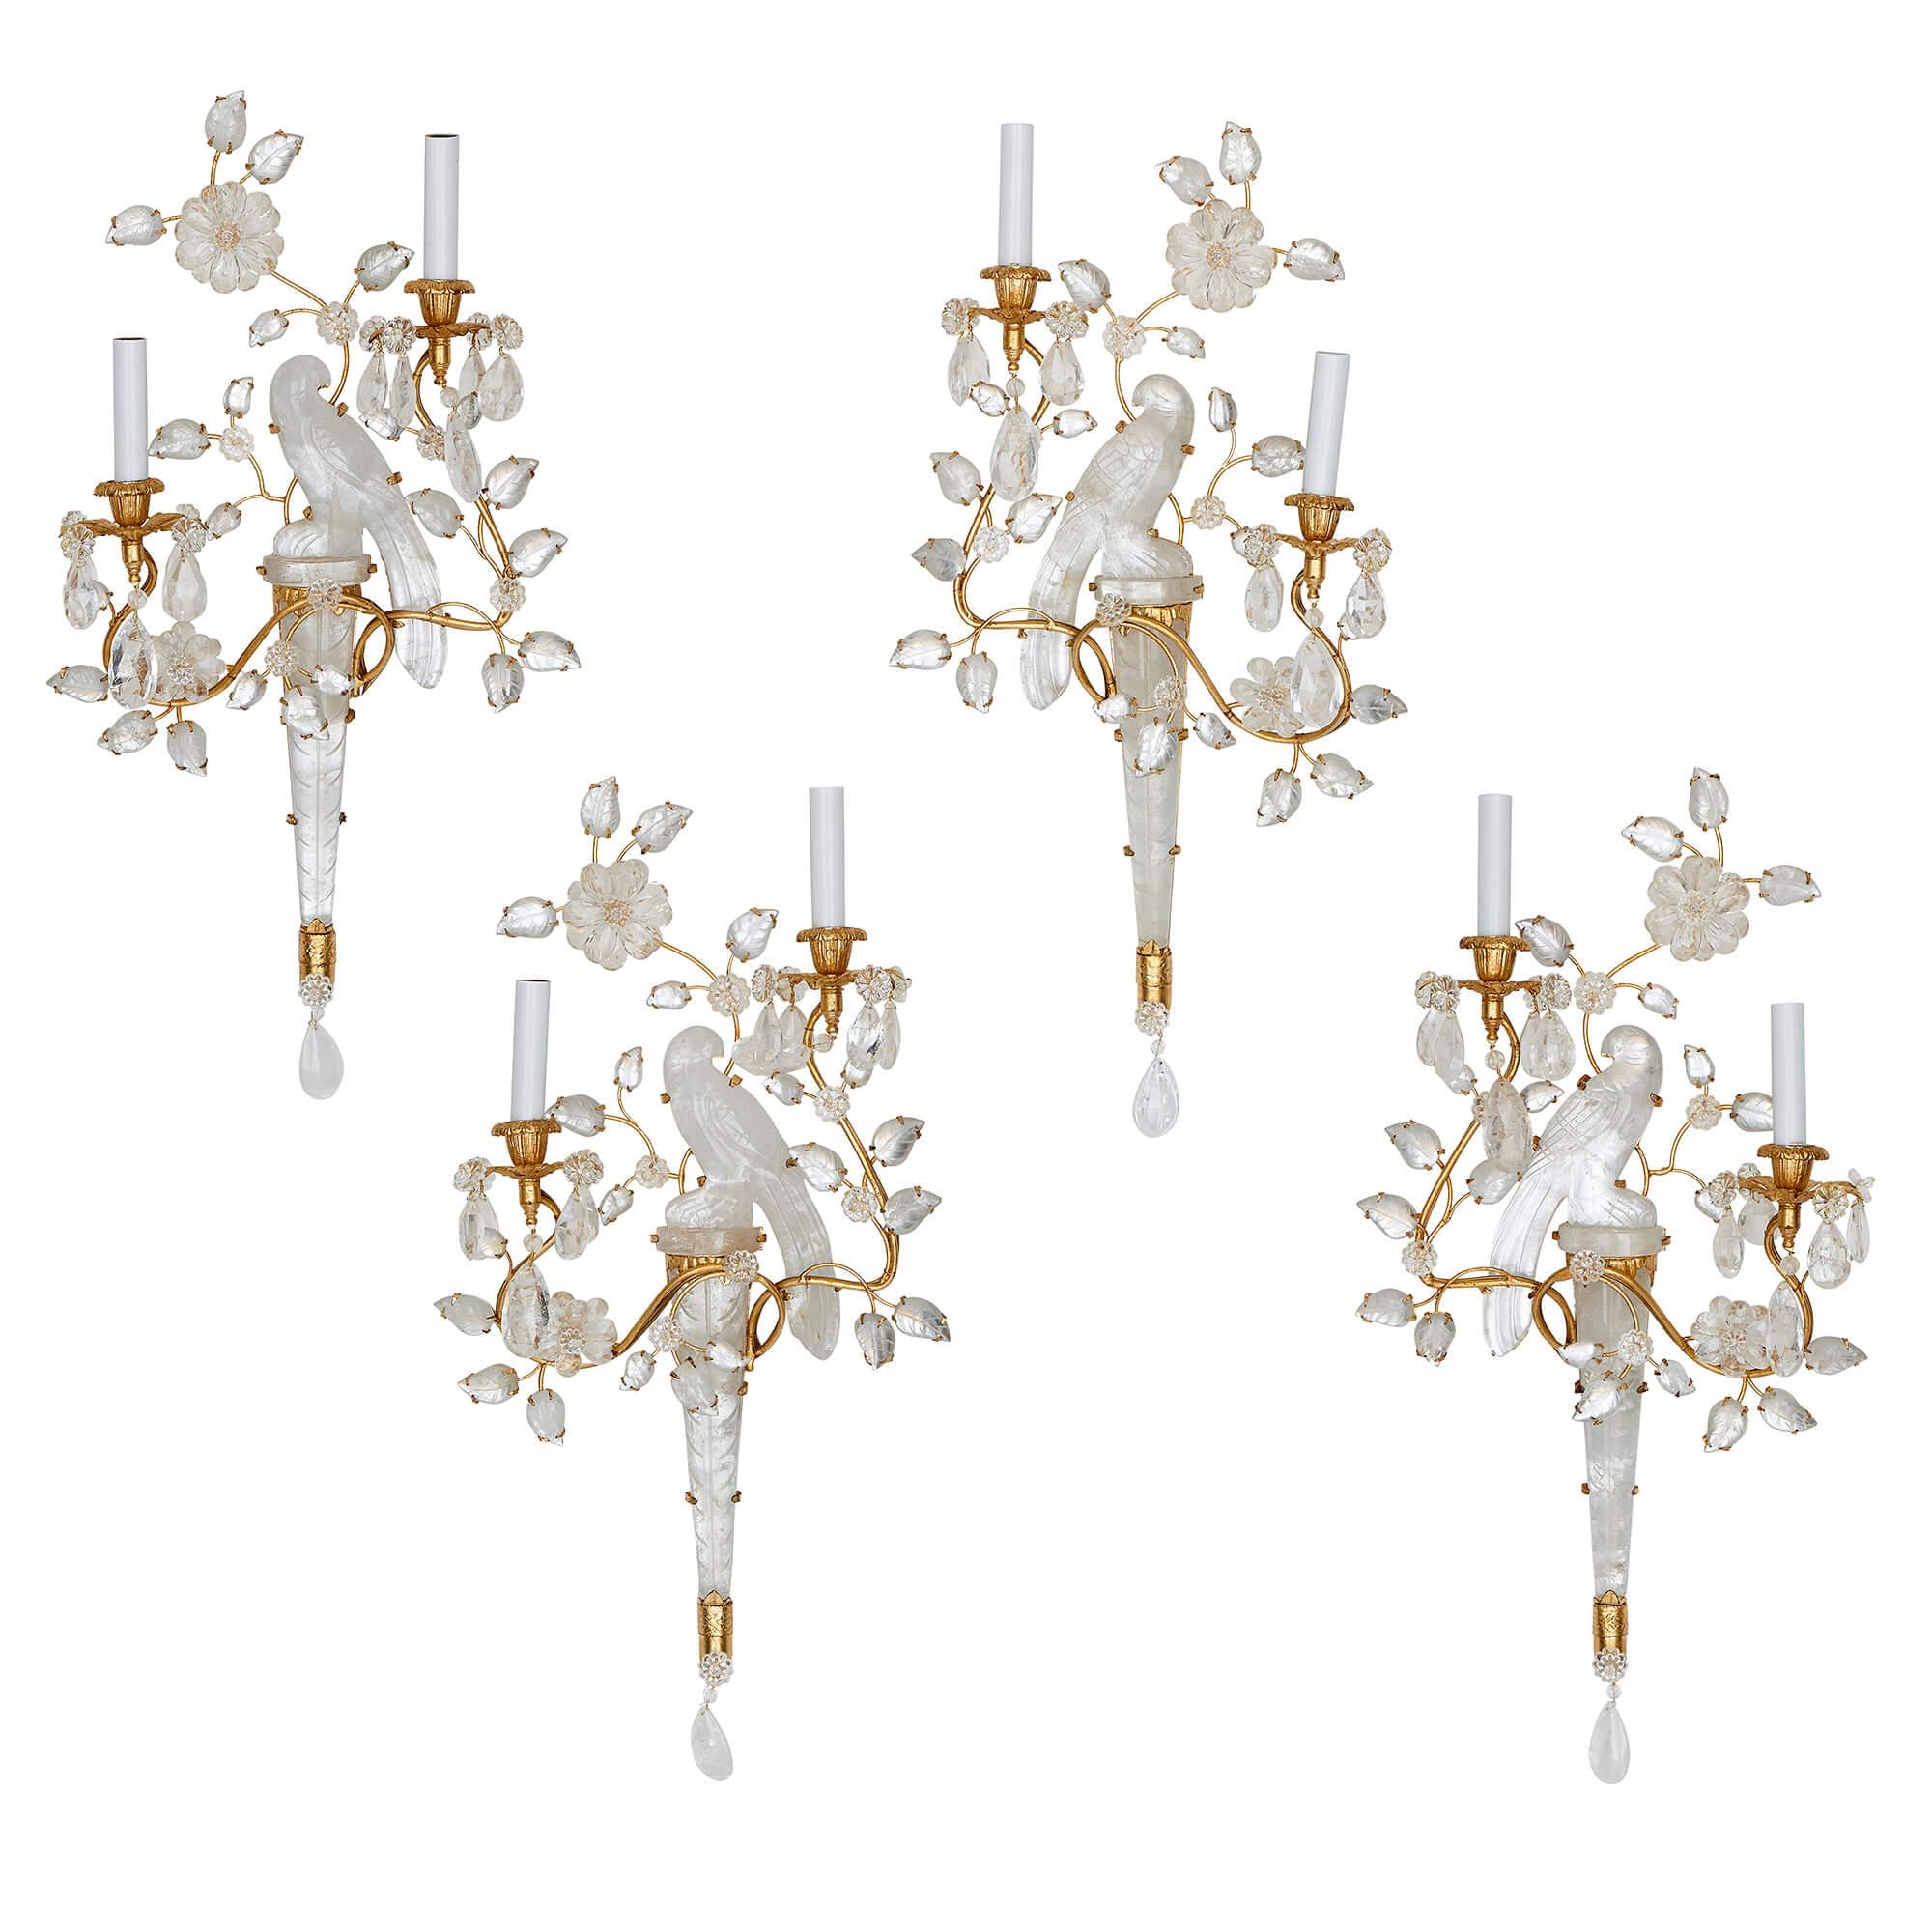 Set of Four Rock Crystal Sconces, Style of Maison Bagues